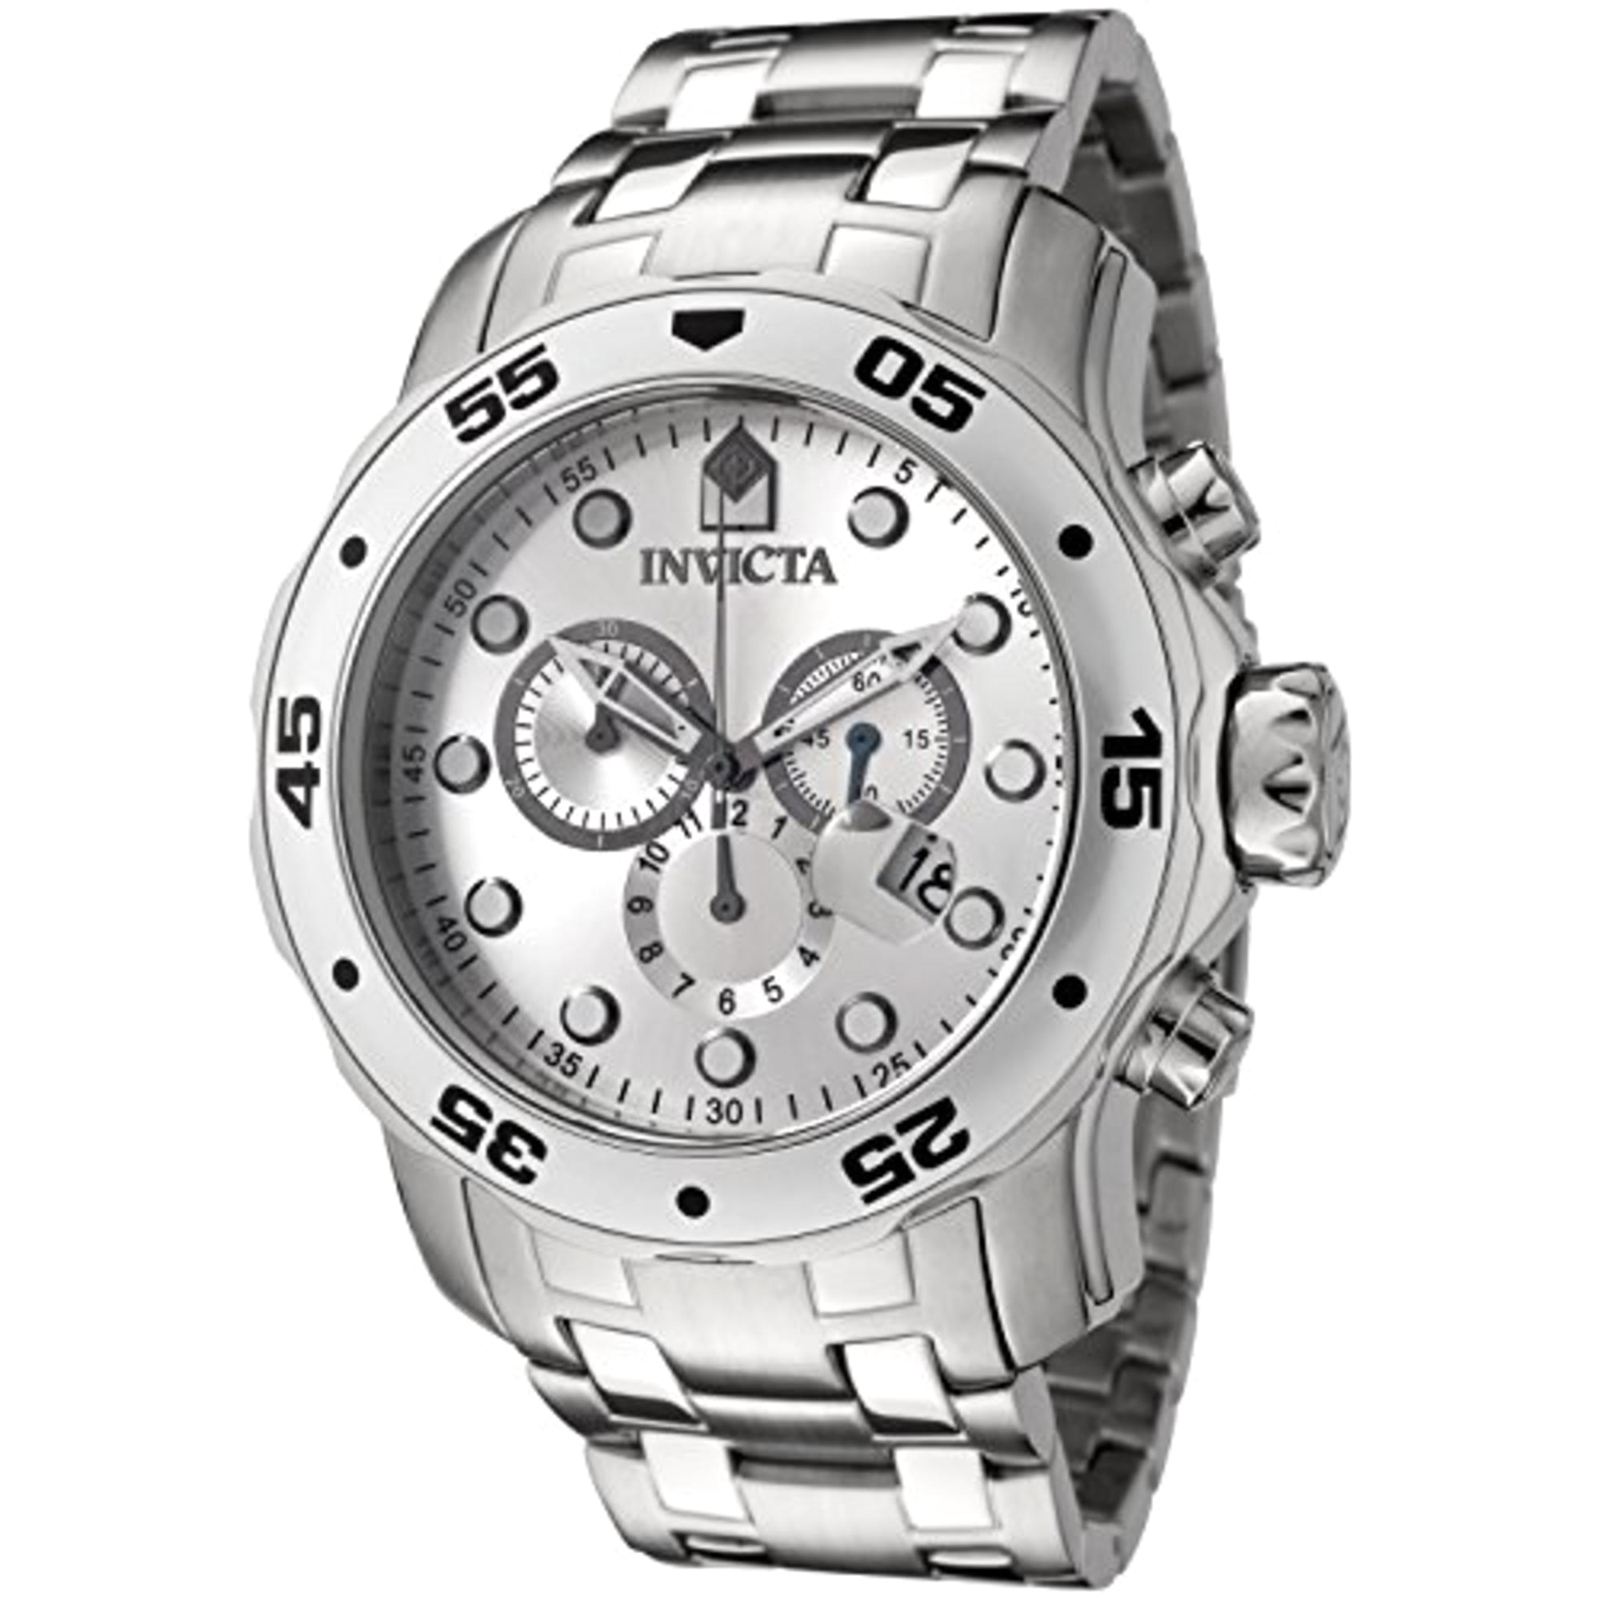 Invicta Pro Diver 0071 Men's Stainless Steel Chronograph Watch – Silver-Tone